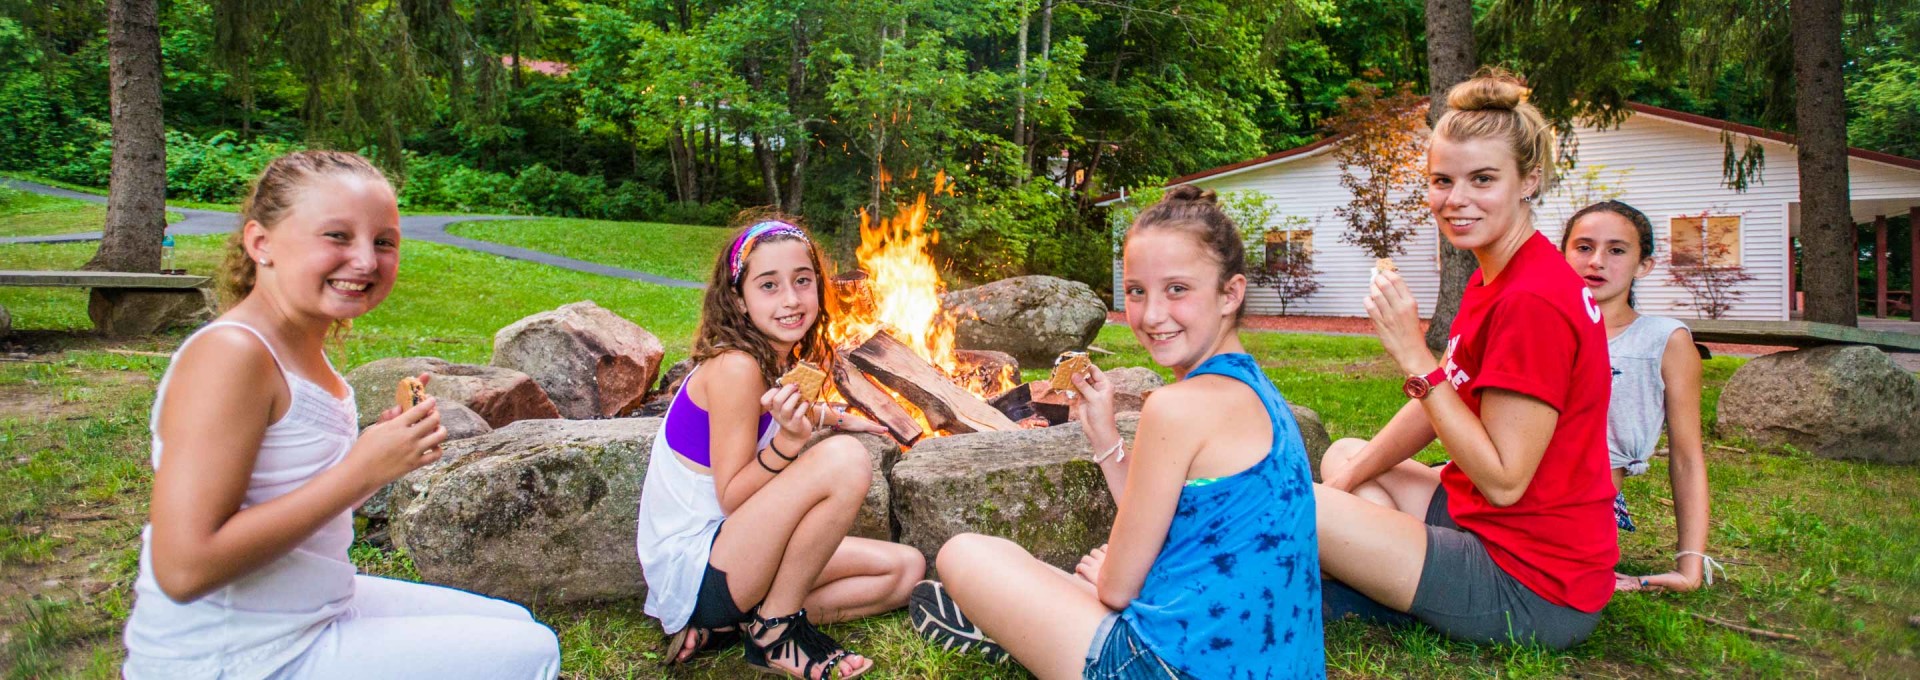 Campers enjoying s'mores by the bonfire